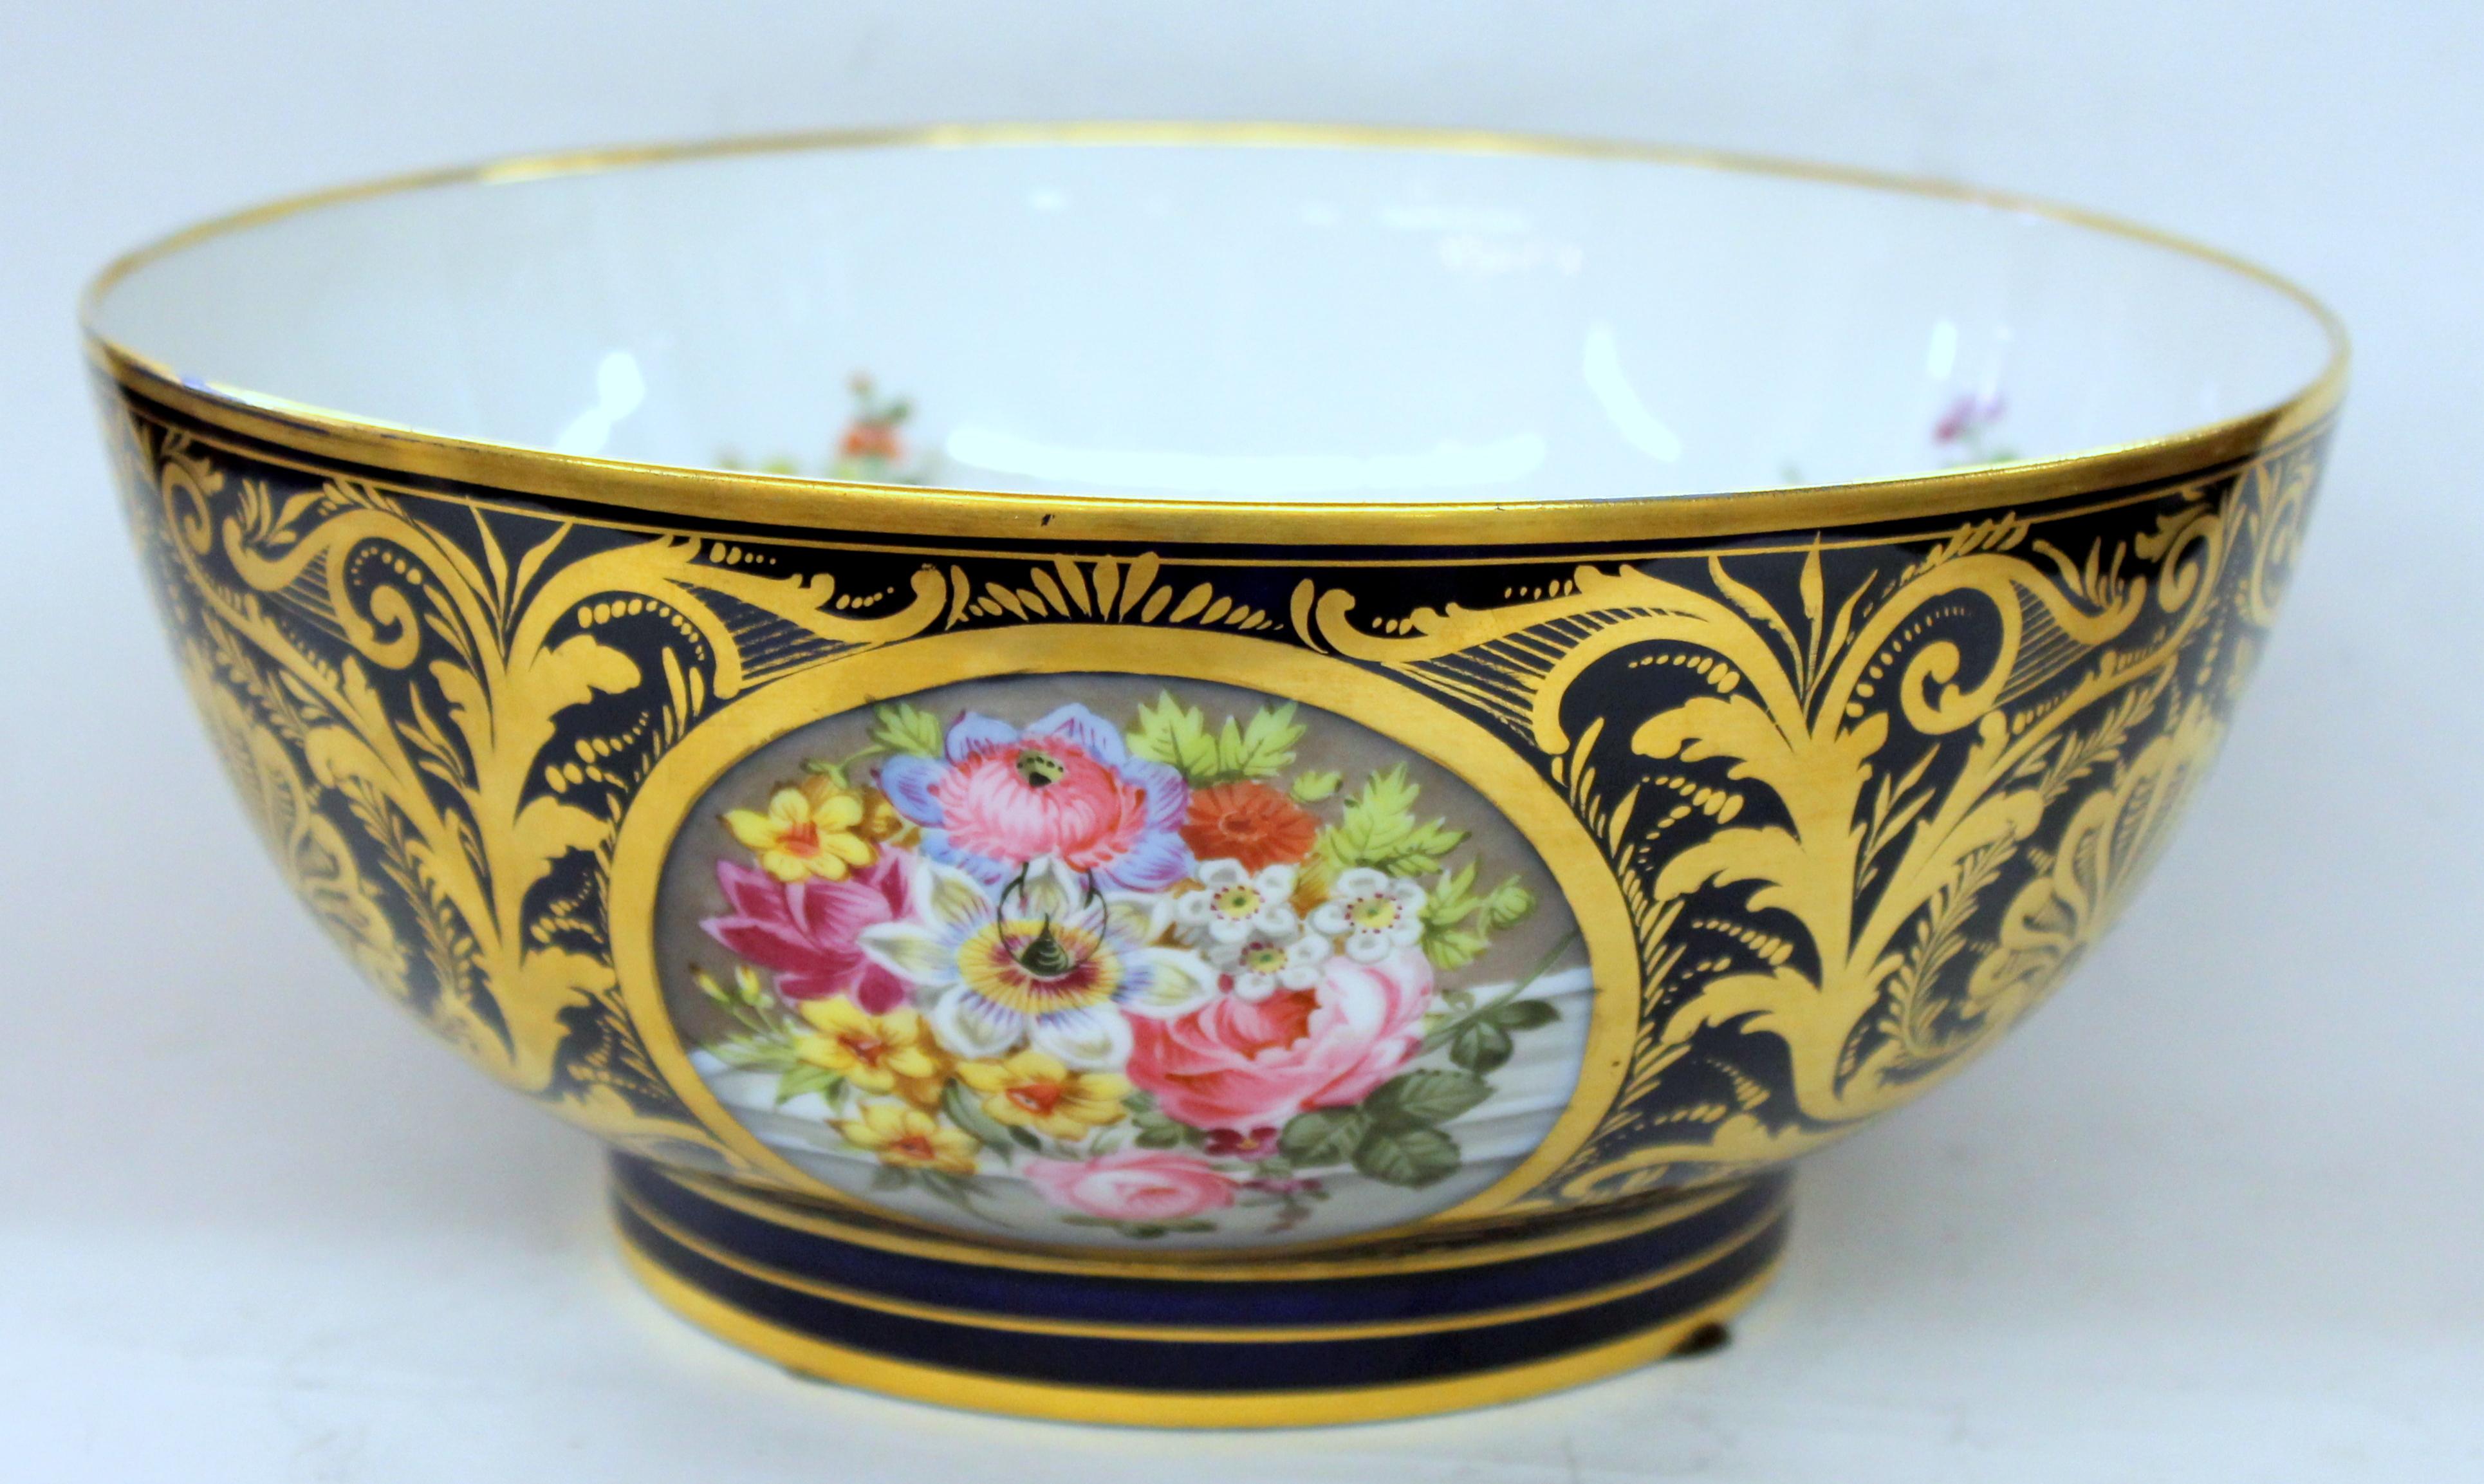 Exquisite quality antique English Derby Porcelain hand painted floral motif and richly gilt cobalt large round bowl

Red painted 